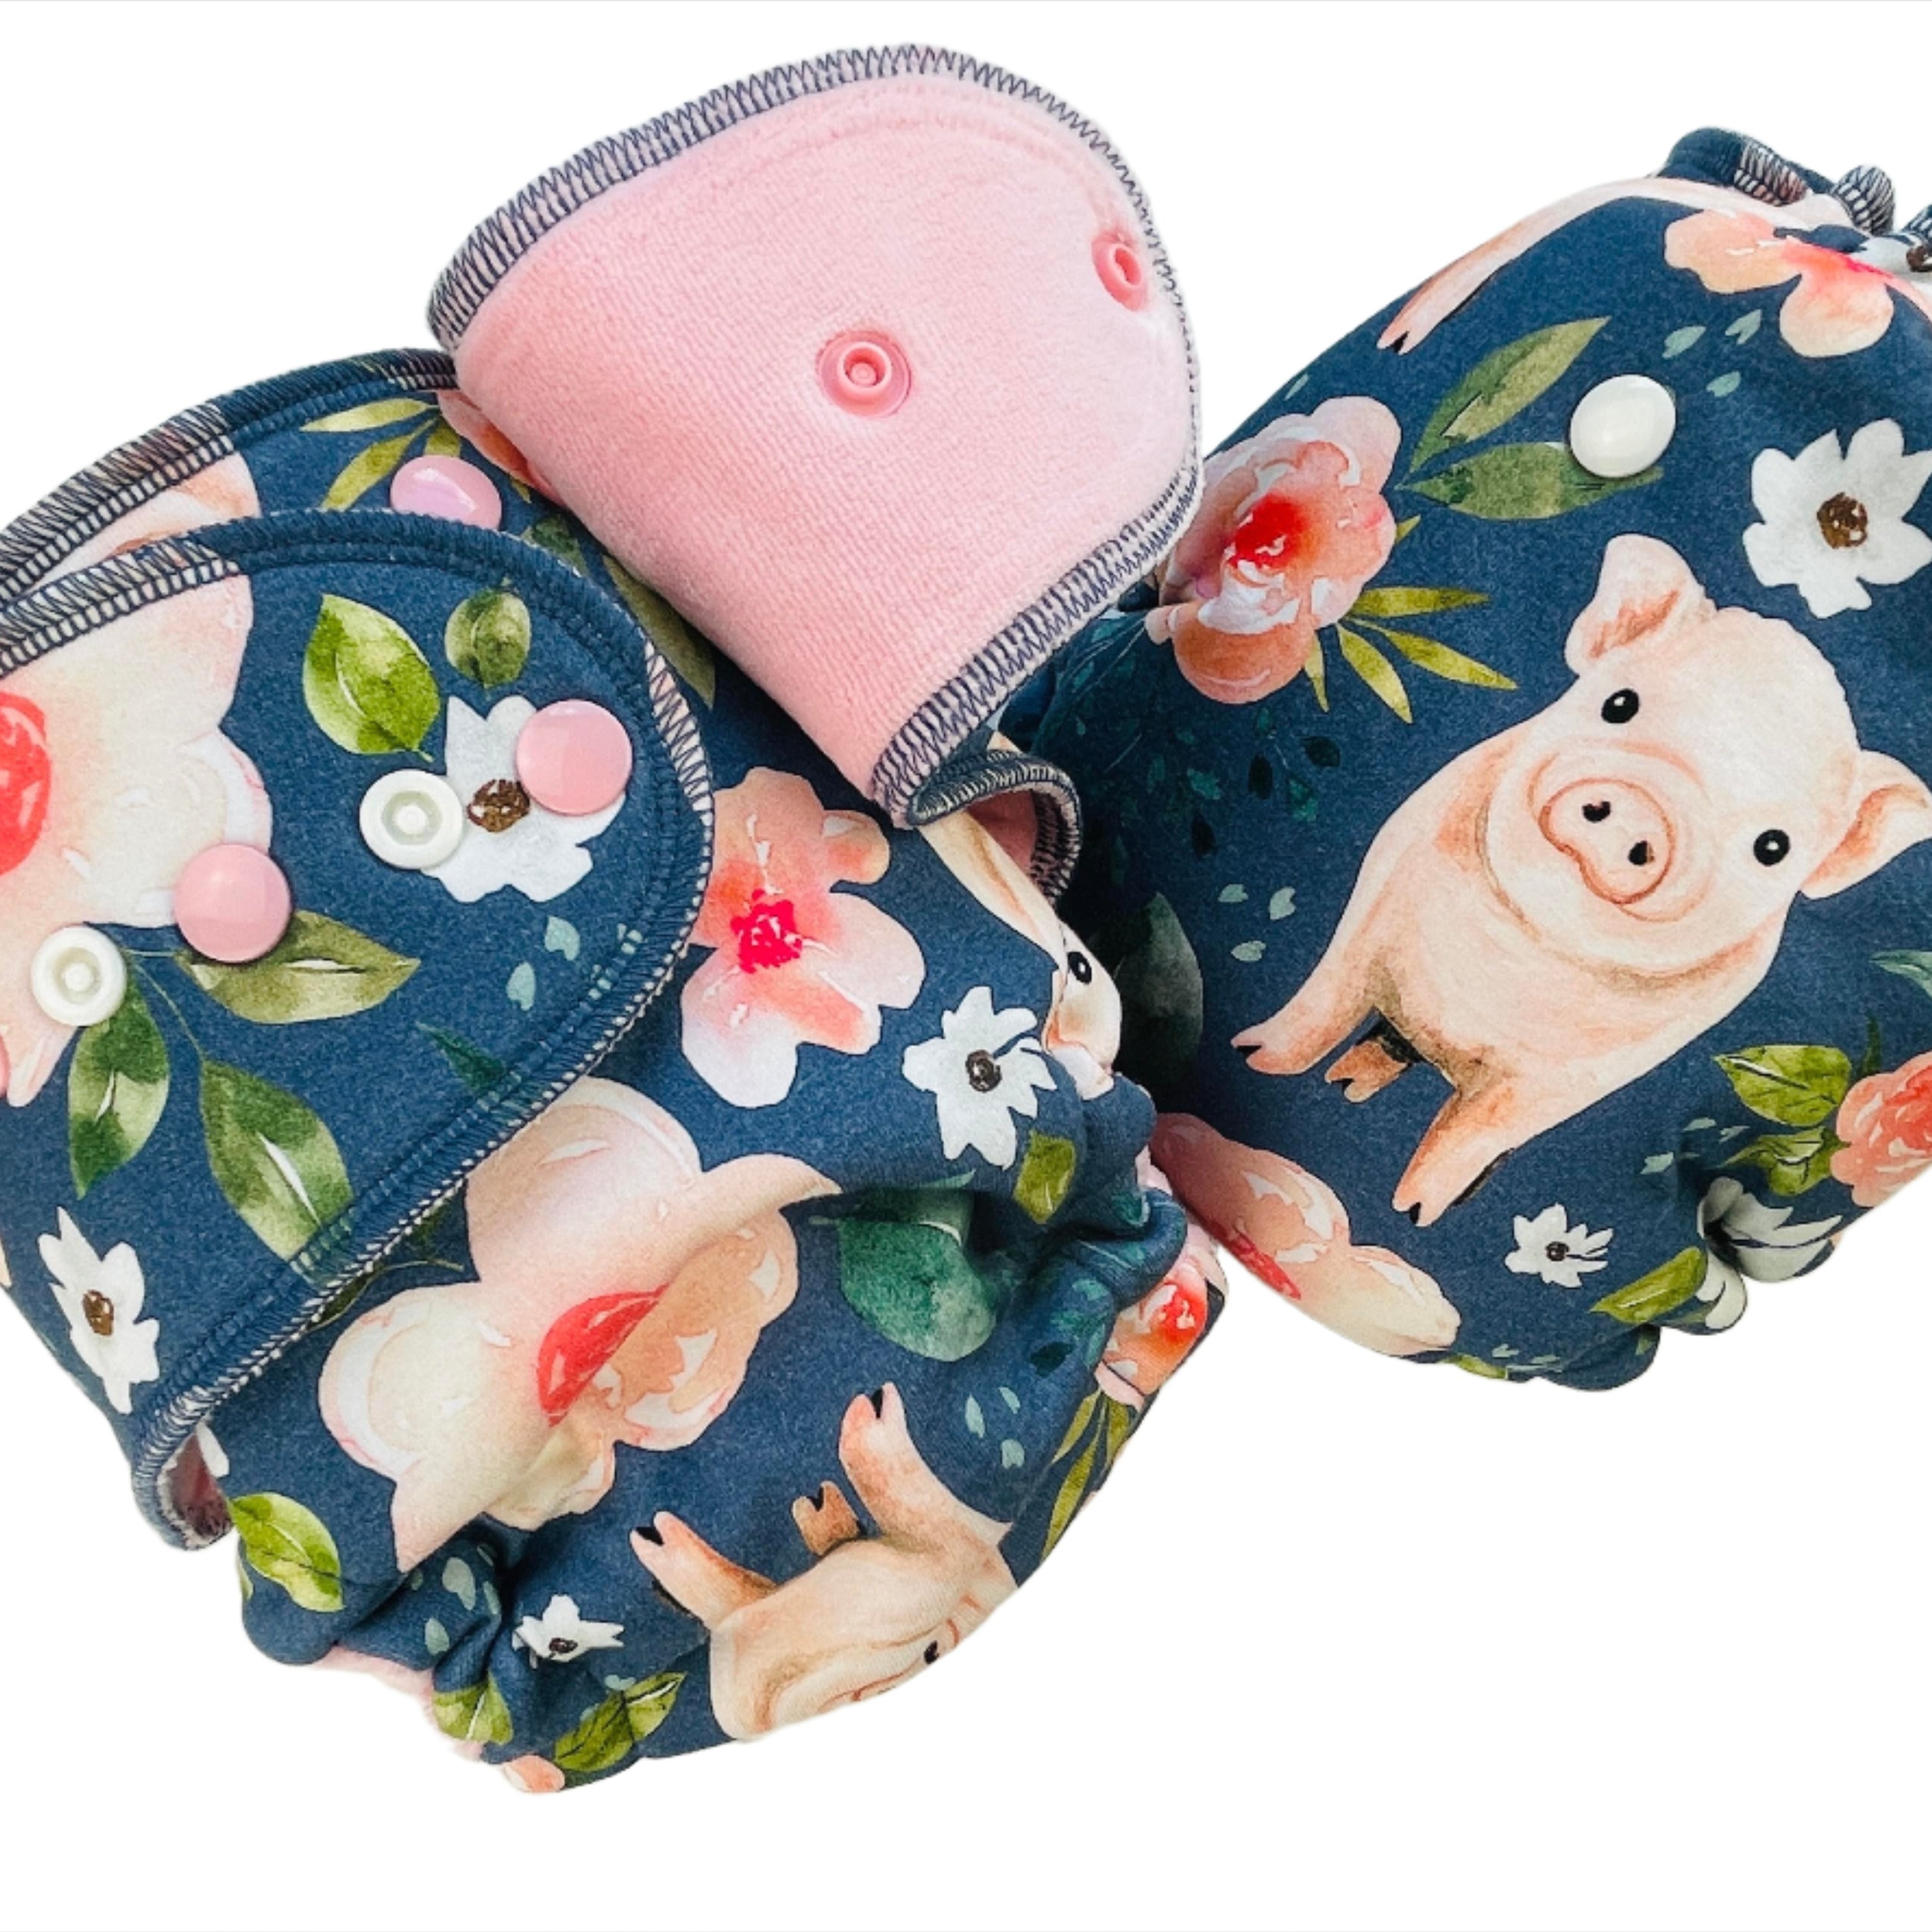 Lilly & Frank One Size Cloth Diaper Wilbur One Size Hybrid Cloth Diapers ~ Comfort Serged